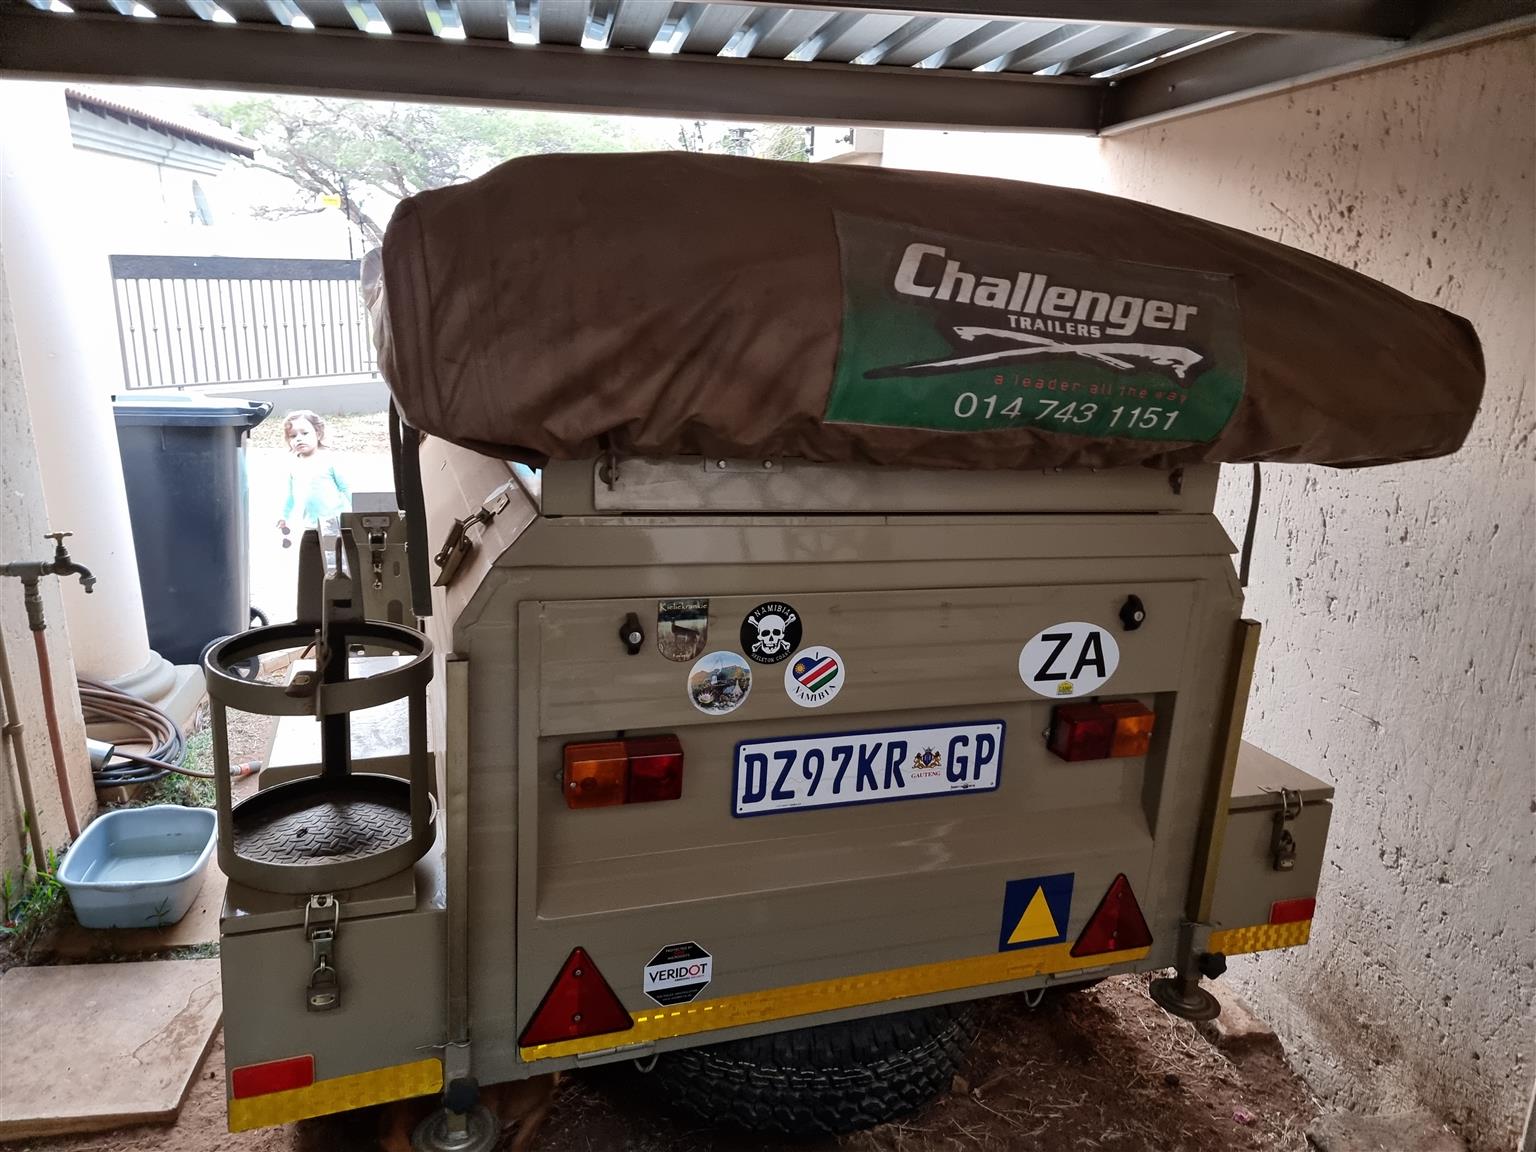 Challanger camping trailer